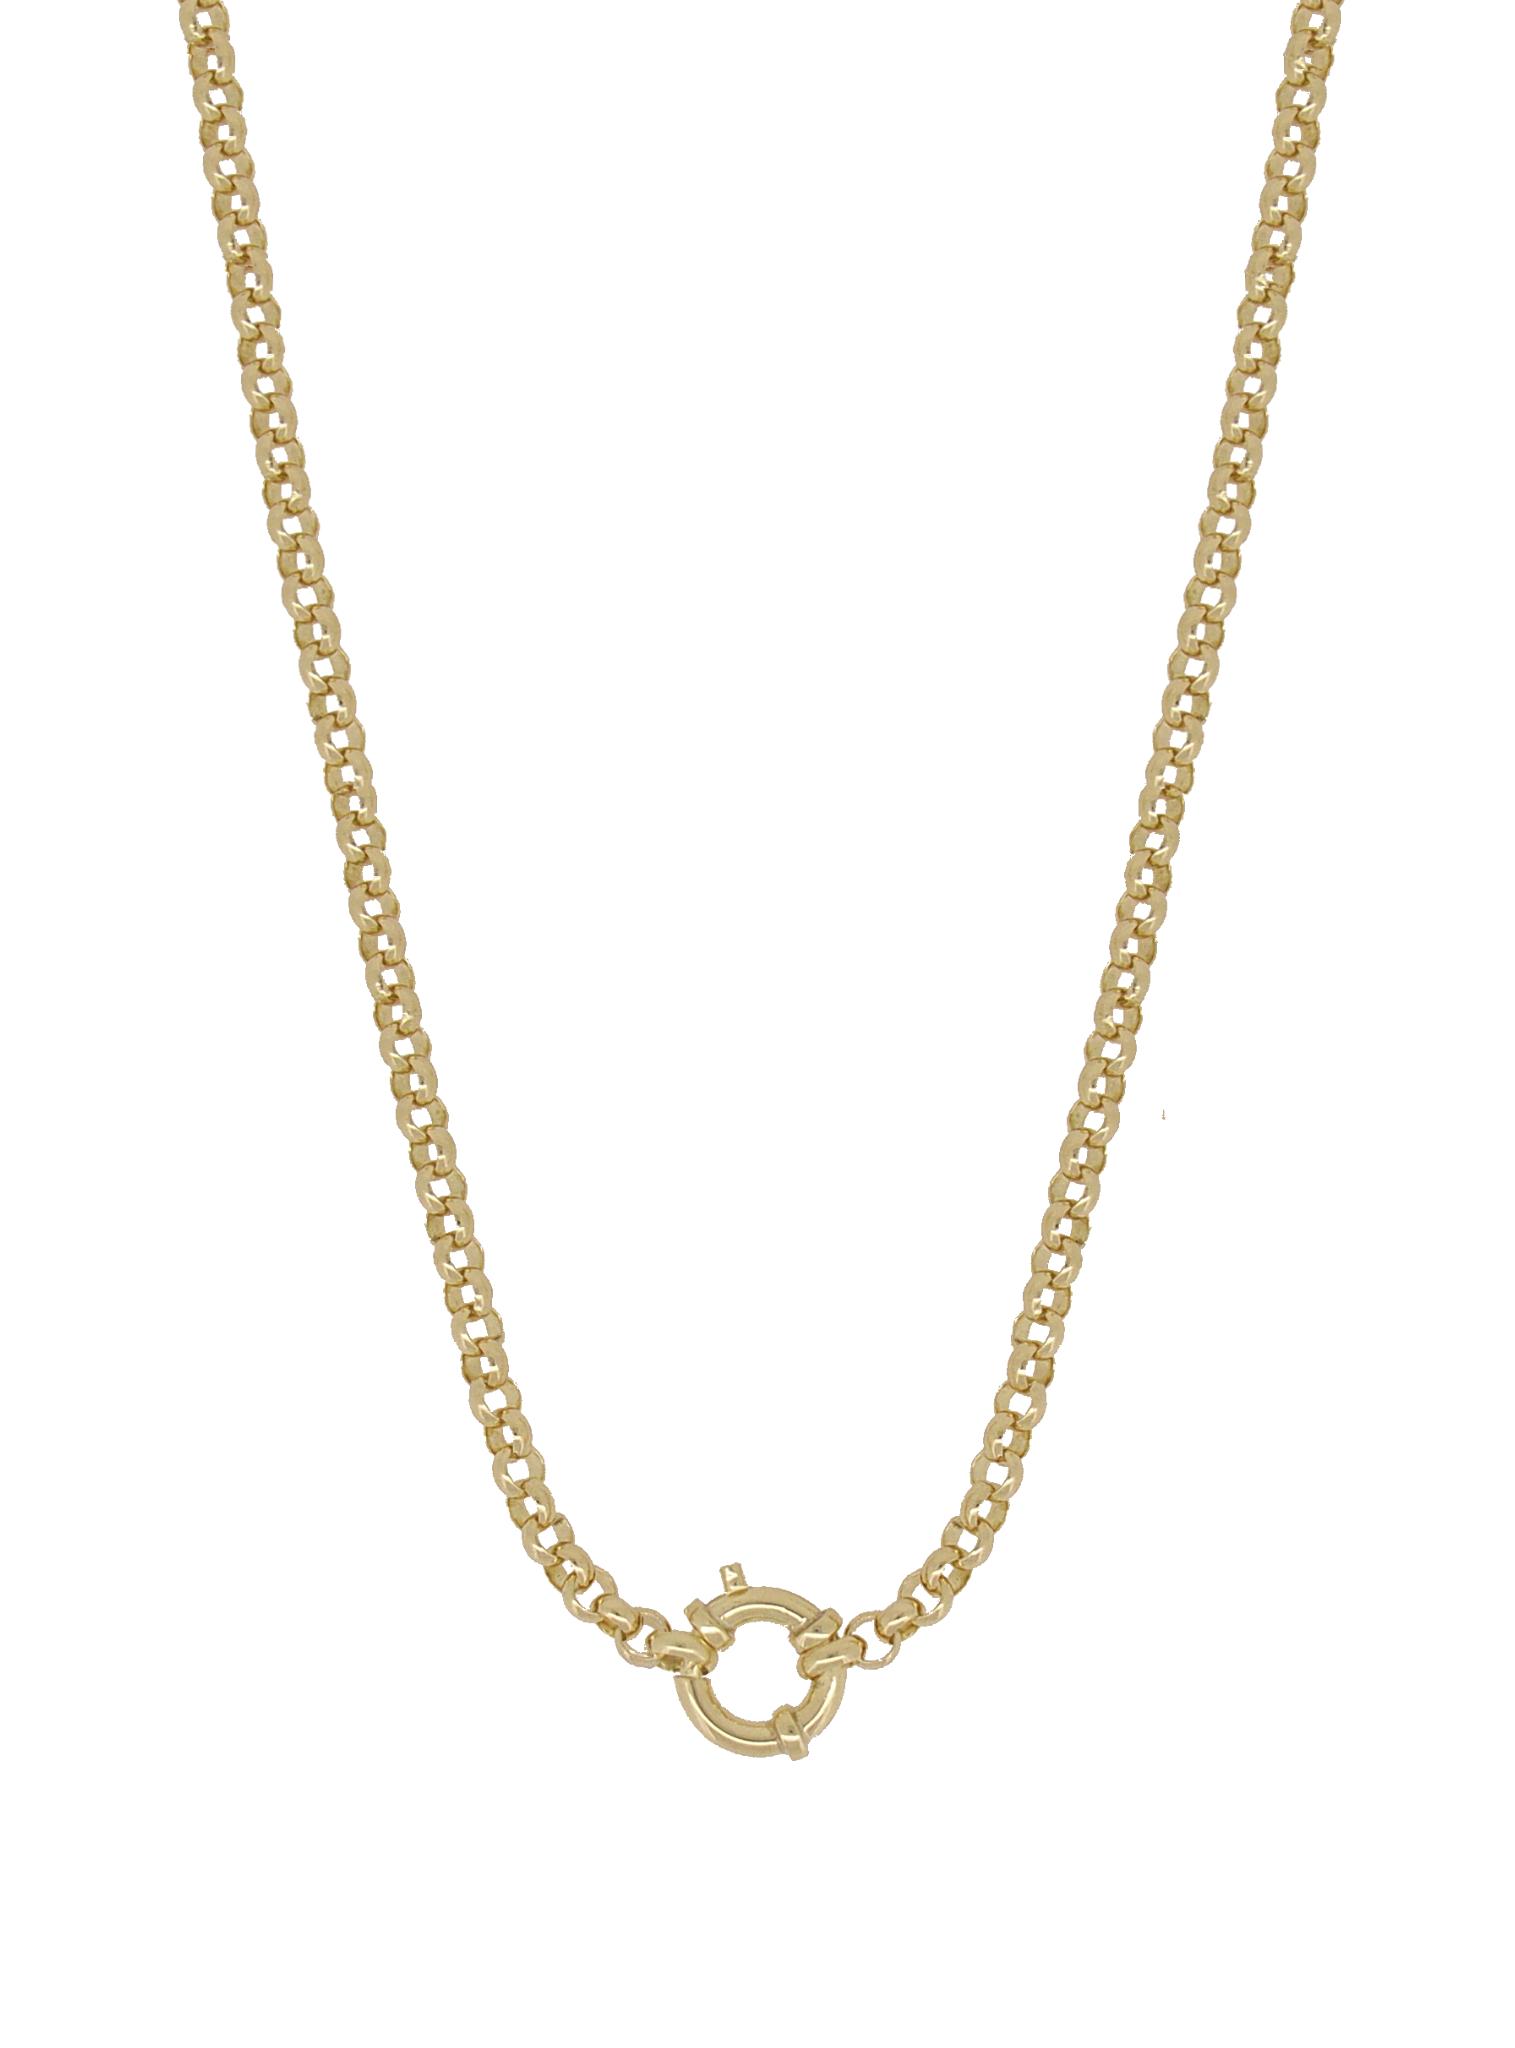 Faith 9ct Gold 9ct Yellow Gold Initial M Necklace 1.15g, 6mm, 16